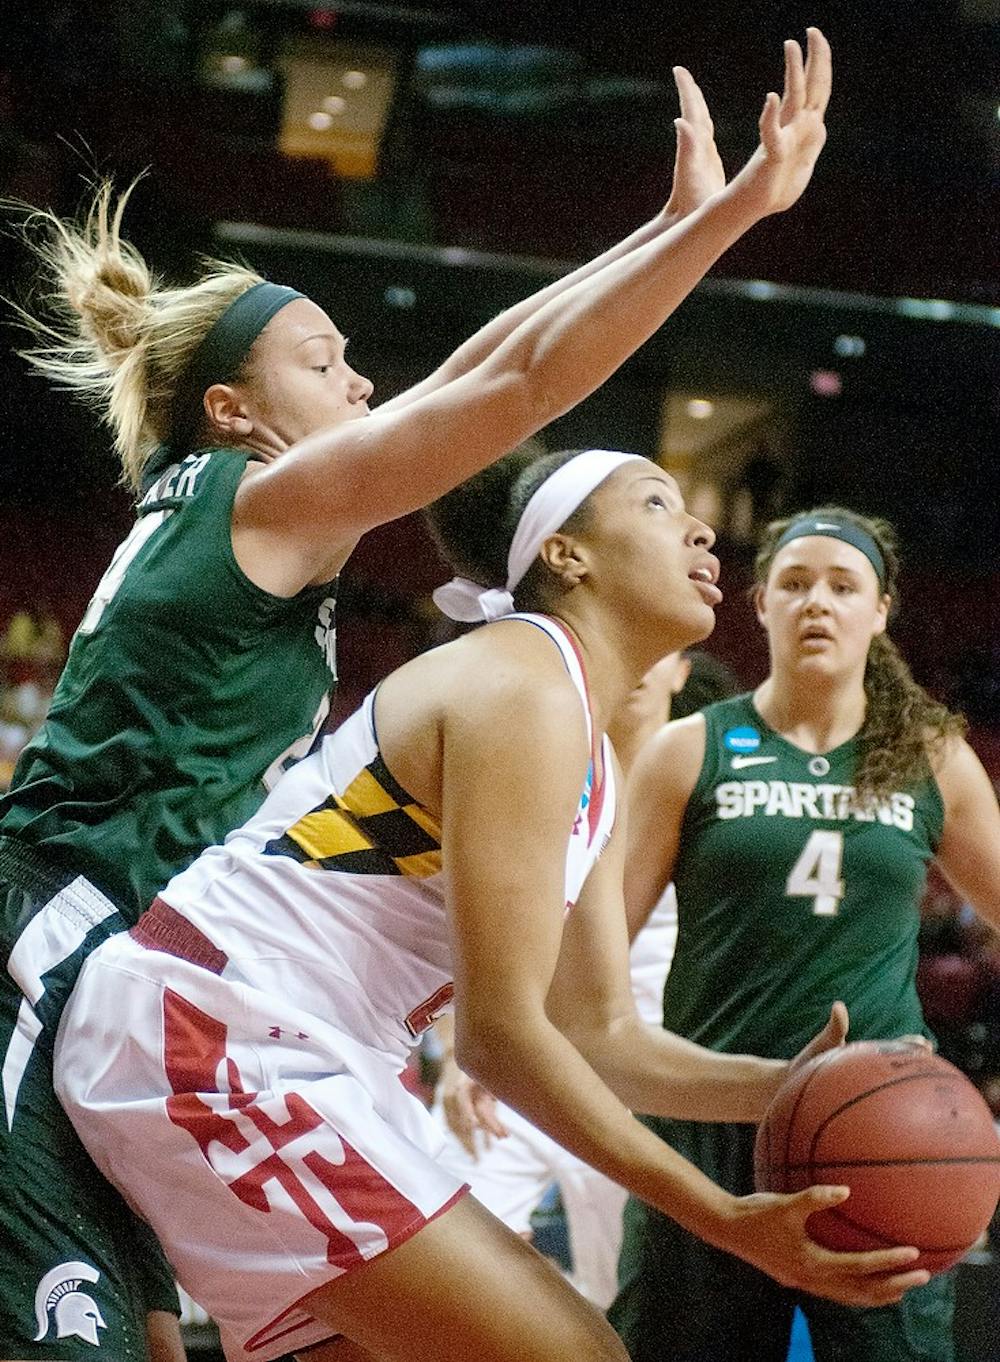 	<p>Senior forward Courtney Schiffauer tries to block Maryland forward<br />
Tianna Hawkins during the second round of the <span class="caps">NCAA</span> Tournament on<br />
Monday, March 25, 2013, at Comcast Center in College Park, Md. The<br />
Spartans lost to the Terrapins, 74-49. Julia Nagy/The State News</p>